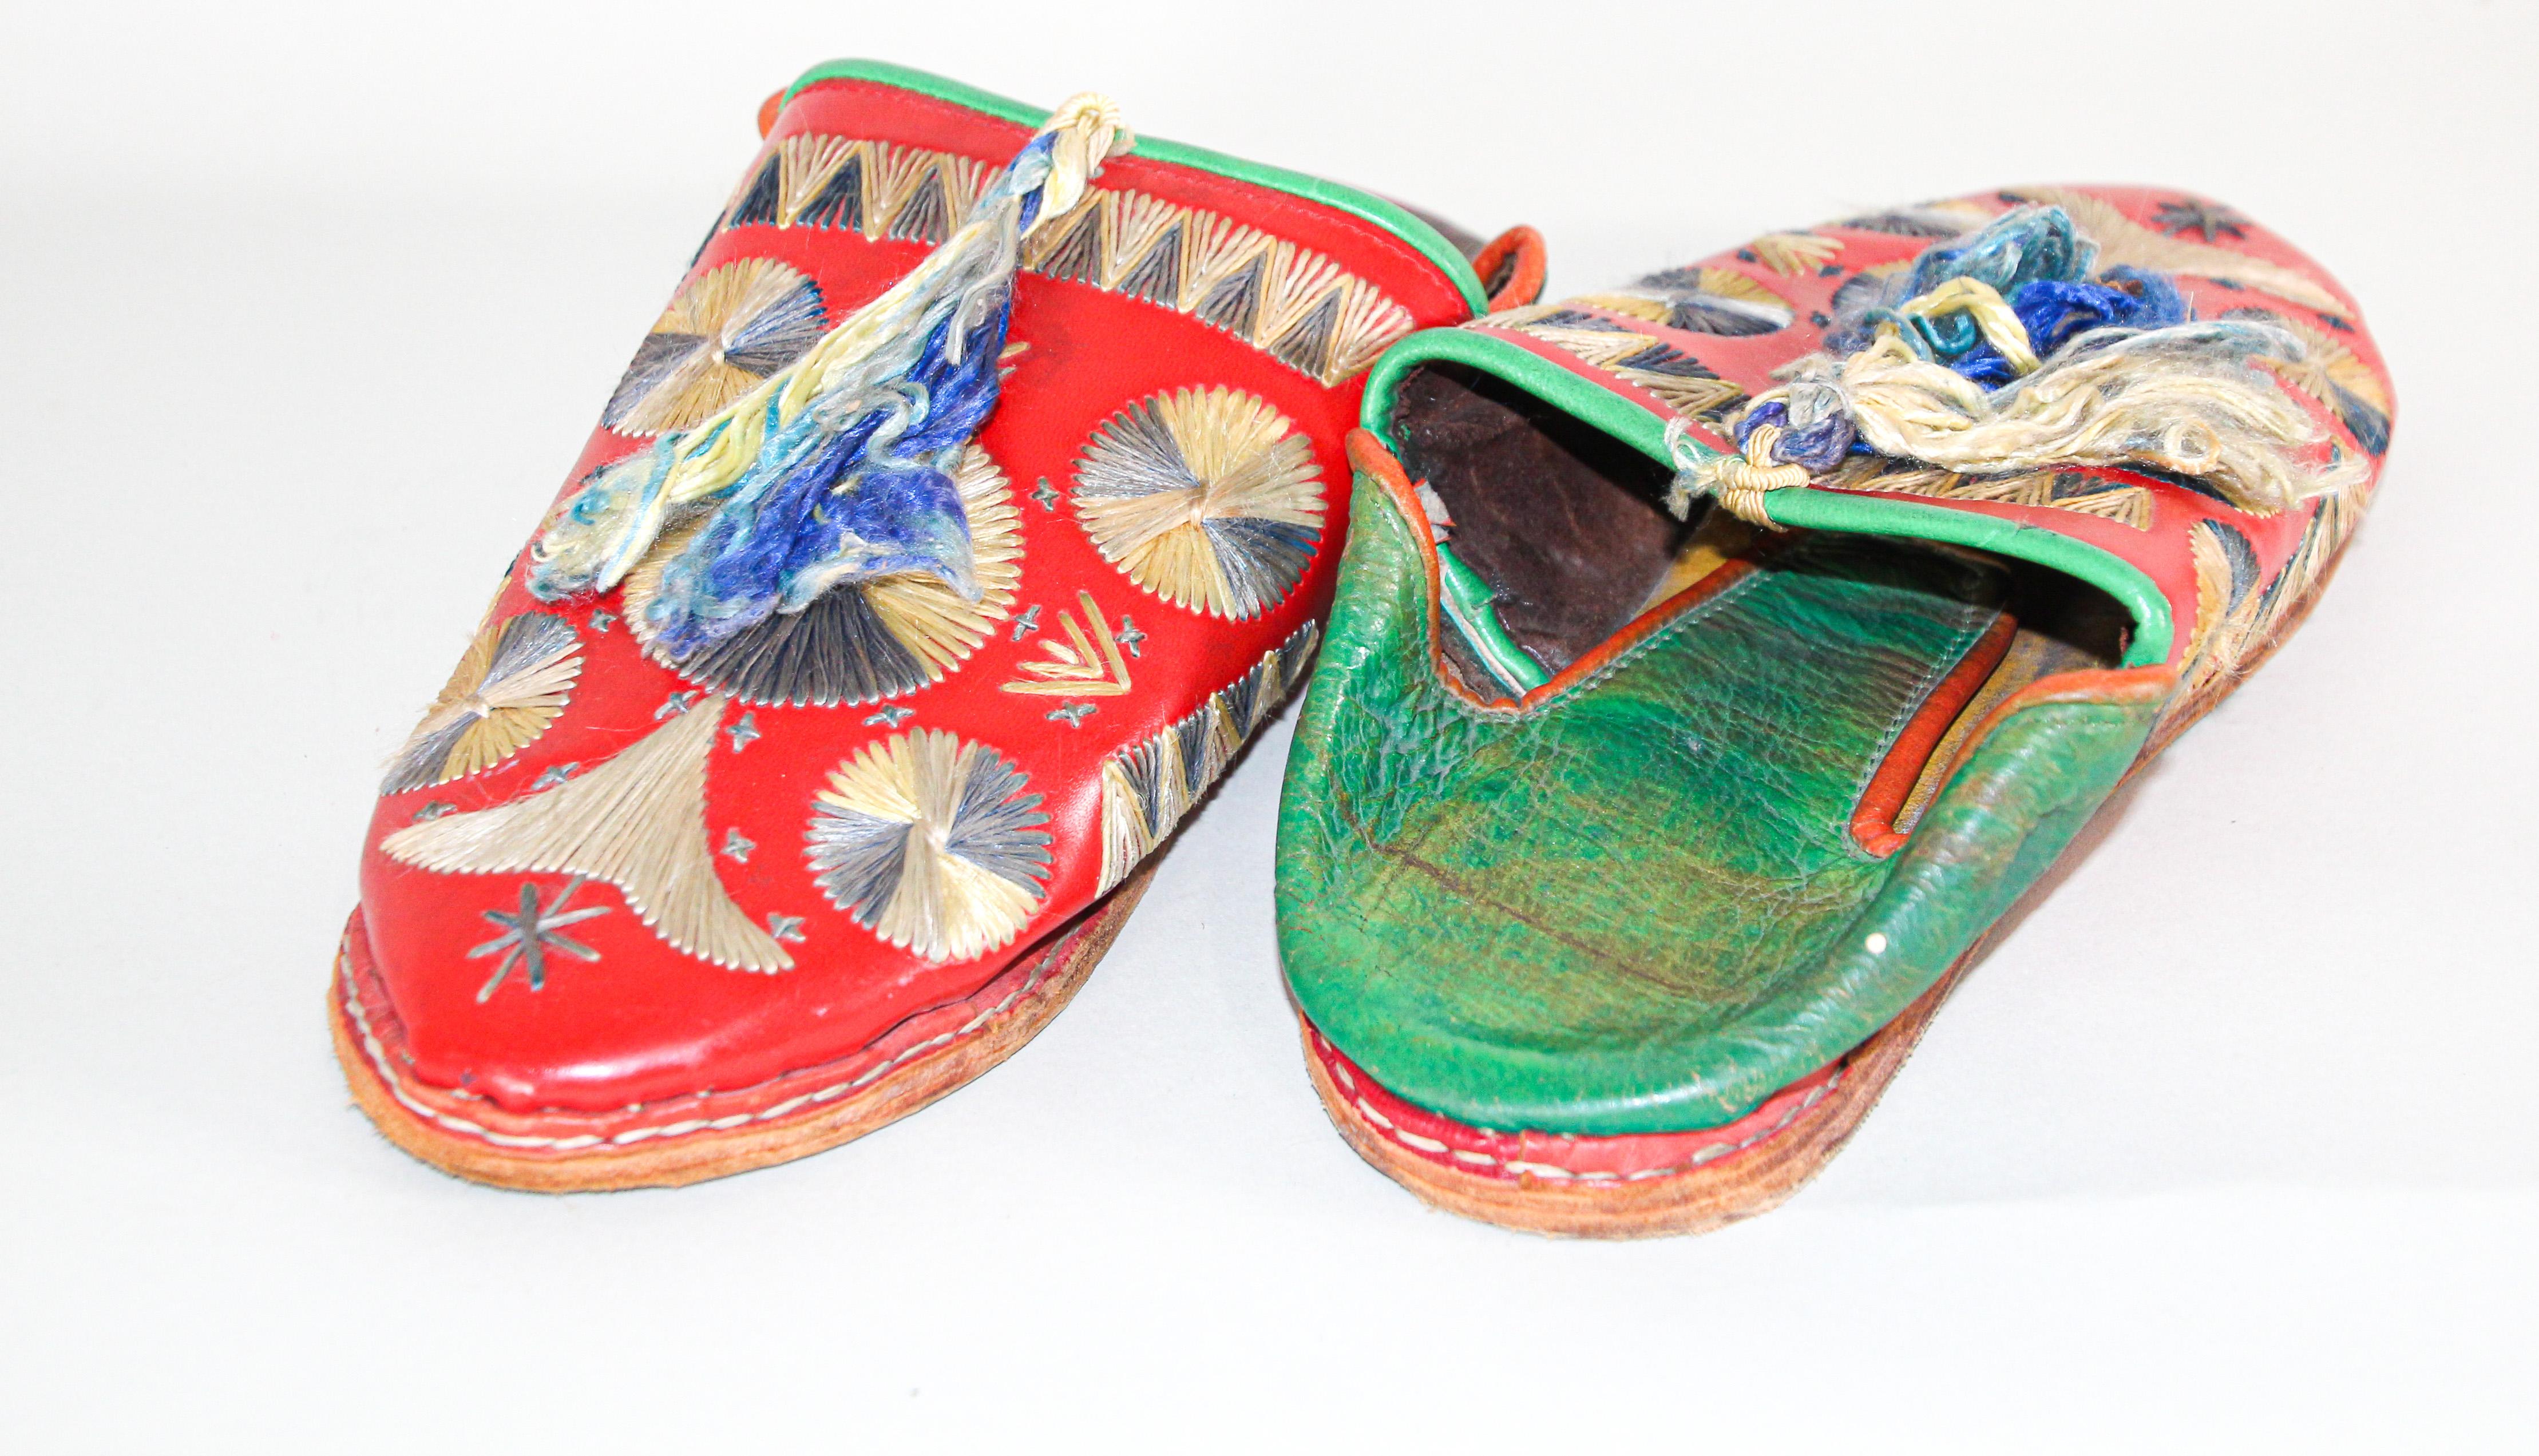 Antique Moroccan leather slippers, known as babouches are handmade from leather dyed in red and green and embroidered in silk wool thread with ethnic floral design, hand-sewn sole.
Hand-tooled traditional Moroccan shoes in Tangier North of